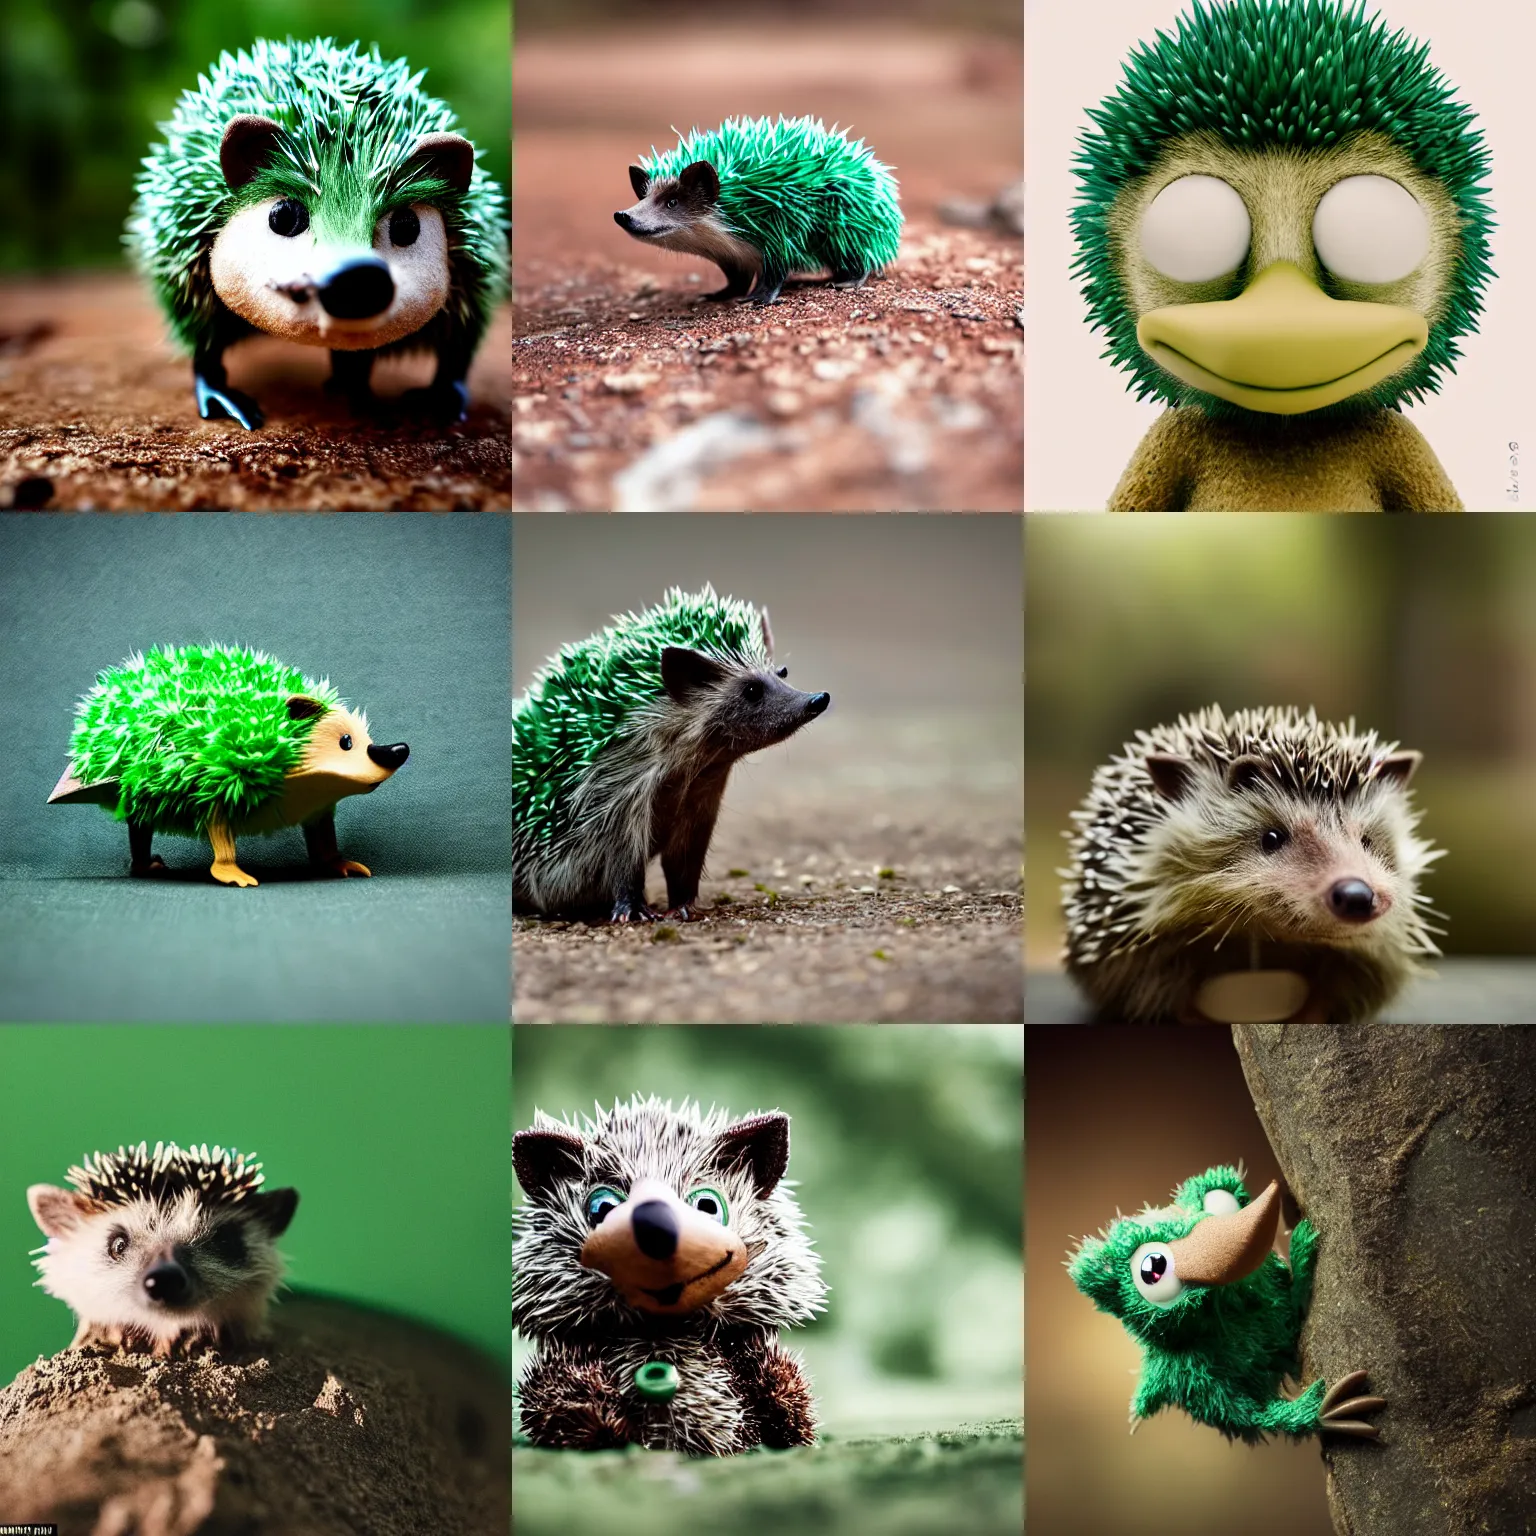 Prompt: a adventurer green anthropomorphic hedgehog, cinematic shot,in the style of Pixar, shallow depth of focus